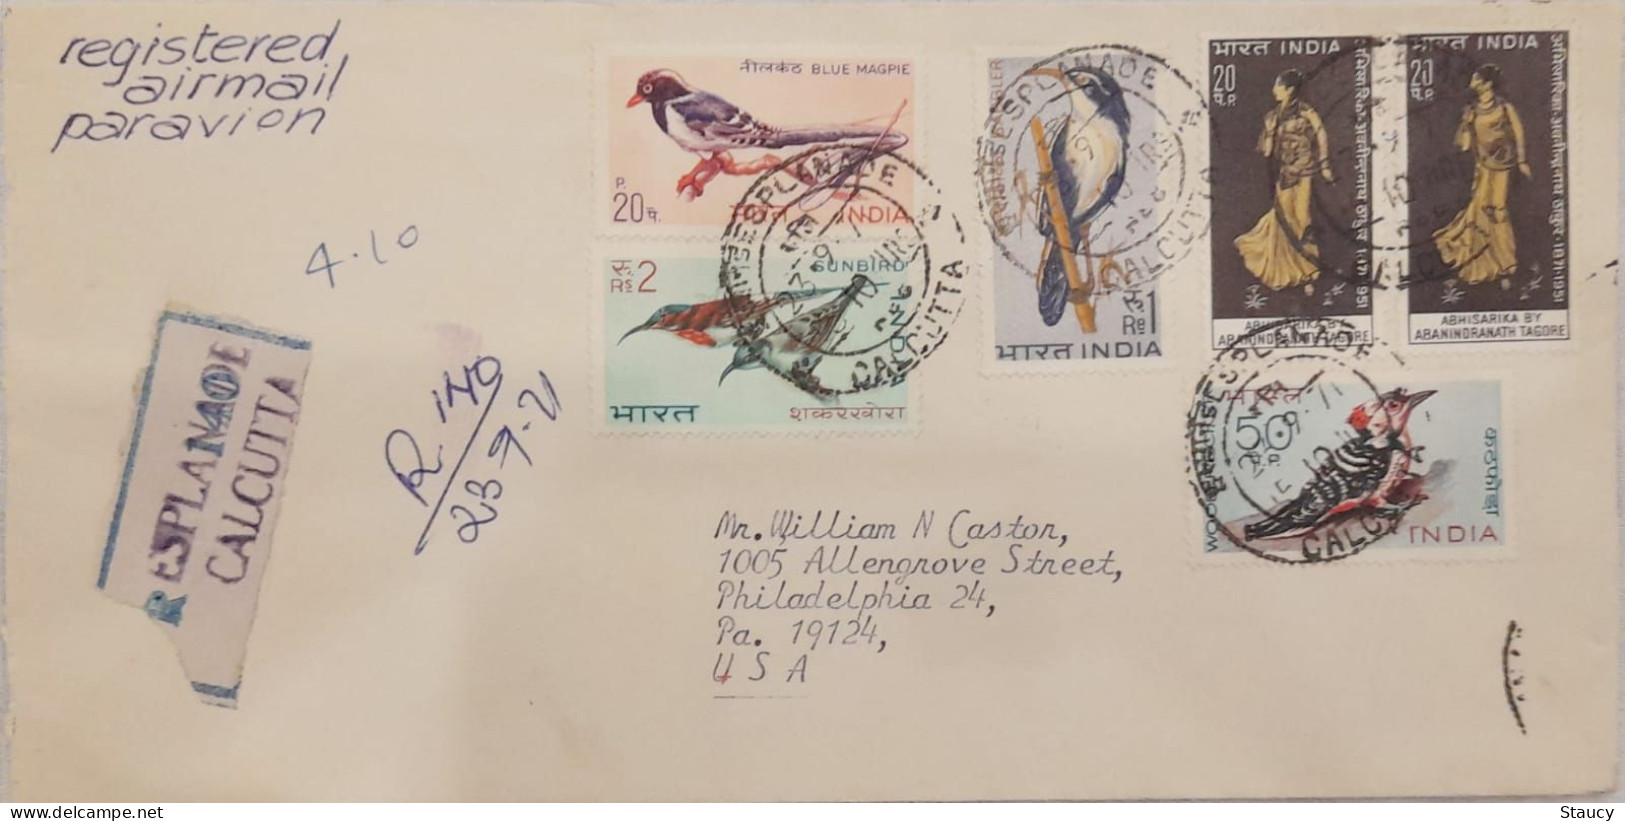 India 1968 BIRDS~Wildlife Preservation - Fauna / Birds Complete Set Of 4 Stamps USED On Registered Cover To USA As Scan - Luftpost